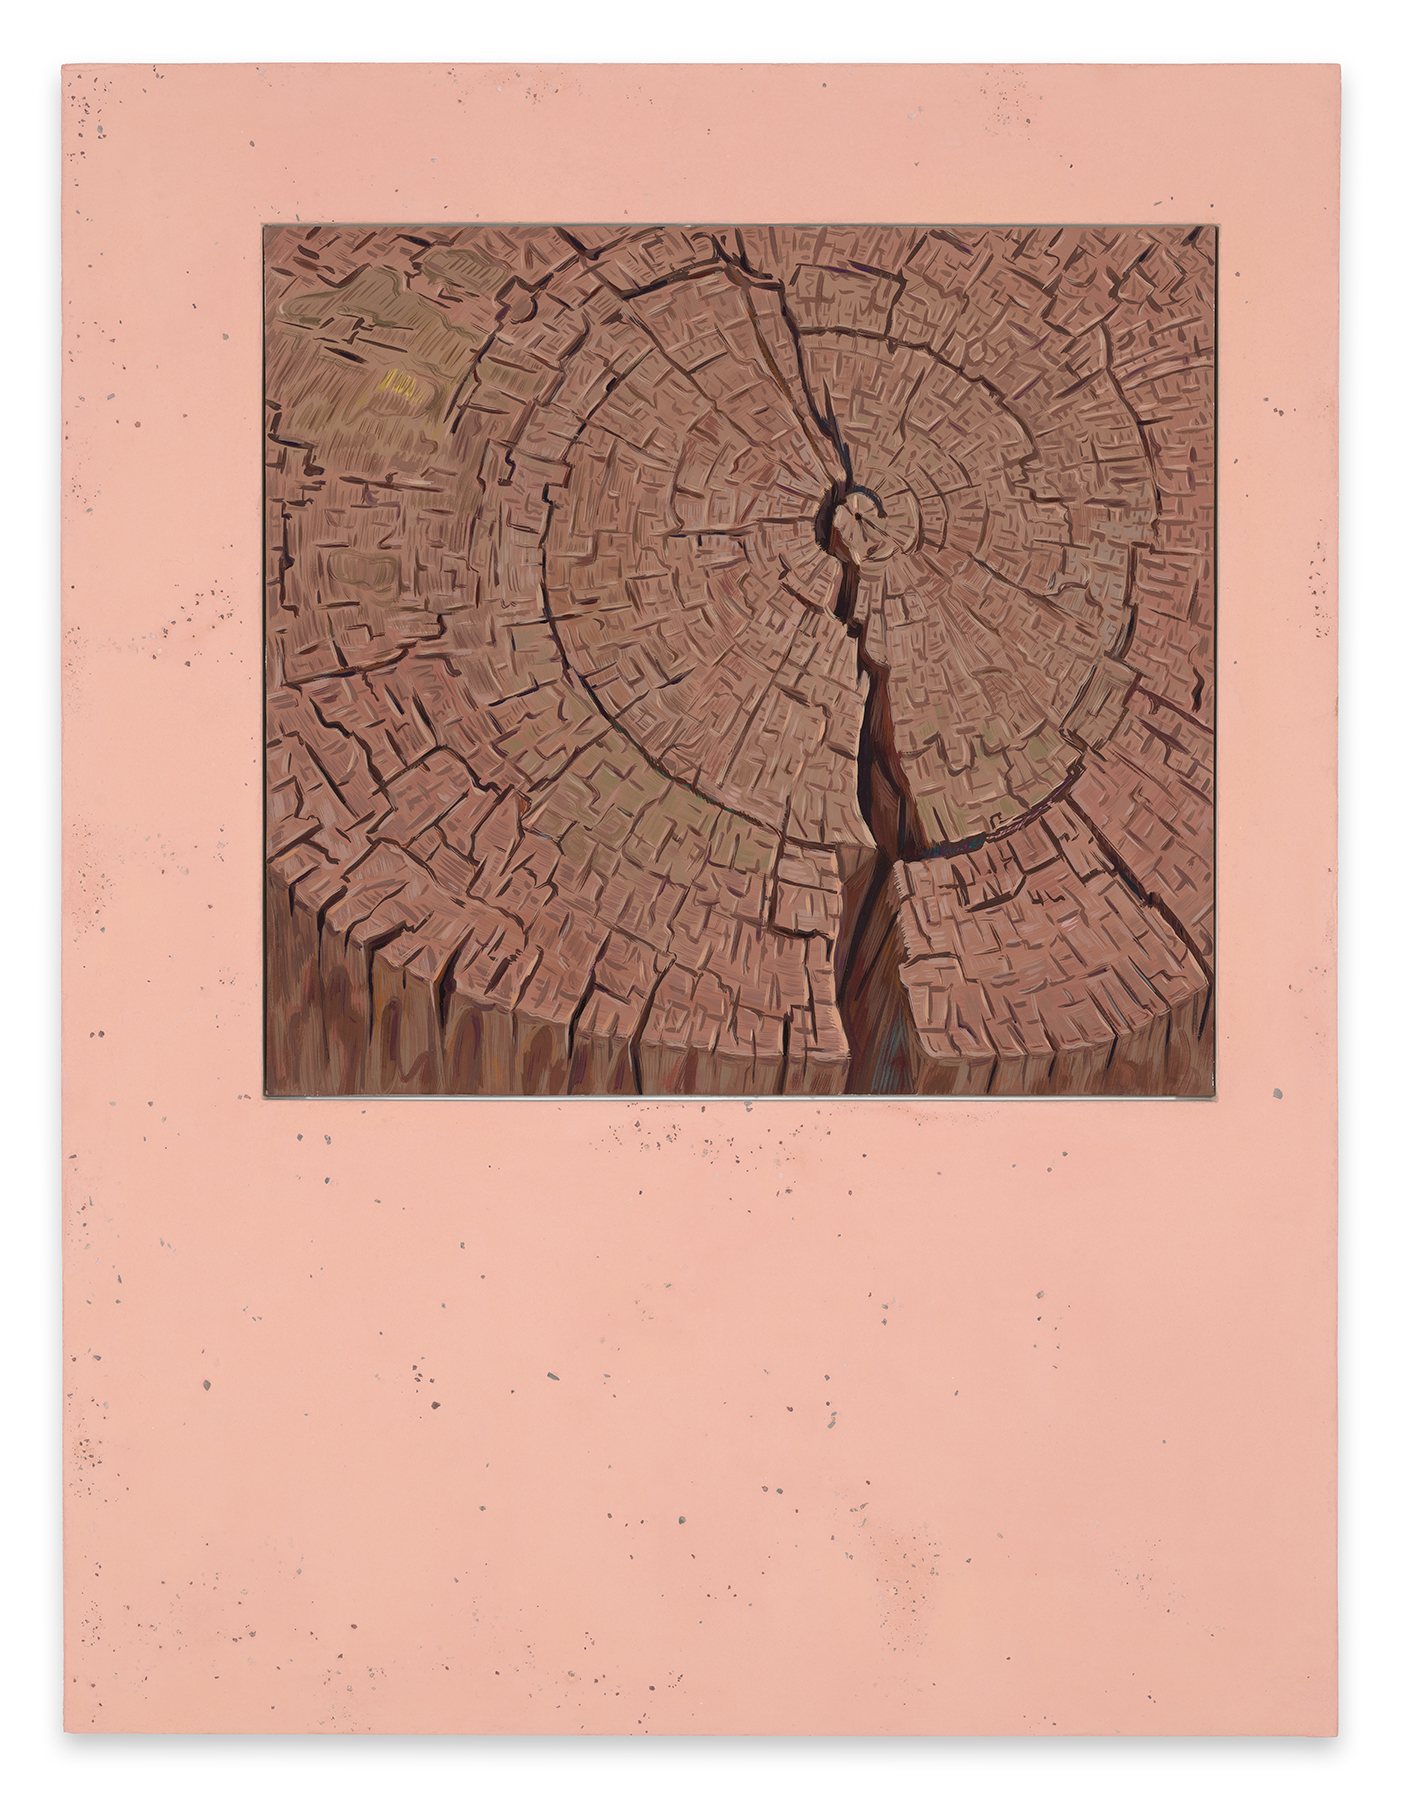 This image shows a painting which is framed in a pigmented pastel pinkish beige panel that includes fragments of earth and rocks from the sites where the paintings were made. The painting draws the viewer downward into a closeup of view of the circular rings of a red fir stump as if it were a cracked sundial. The top of the stump consumes the picture frame with its flatness and multiple fissures percolating through the concentric surface.  There is a large cavernous split down the center of the desiccated wood.   The creation of a three-dimensional stump is articulated with a vertical curved painted band at the bottom of the painting to represent the side of the stump. All of the fissures are painted as little short cleaves and cracks, like hack marks in the surface, in a color range from dark browns, beige browns, beige pinks, greens, yellows and occasional blue marks.